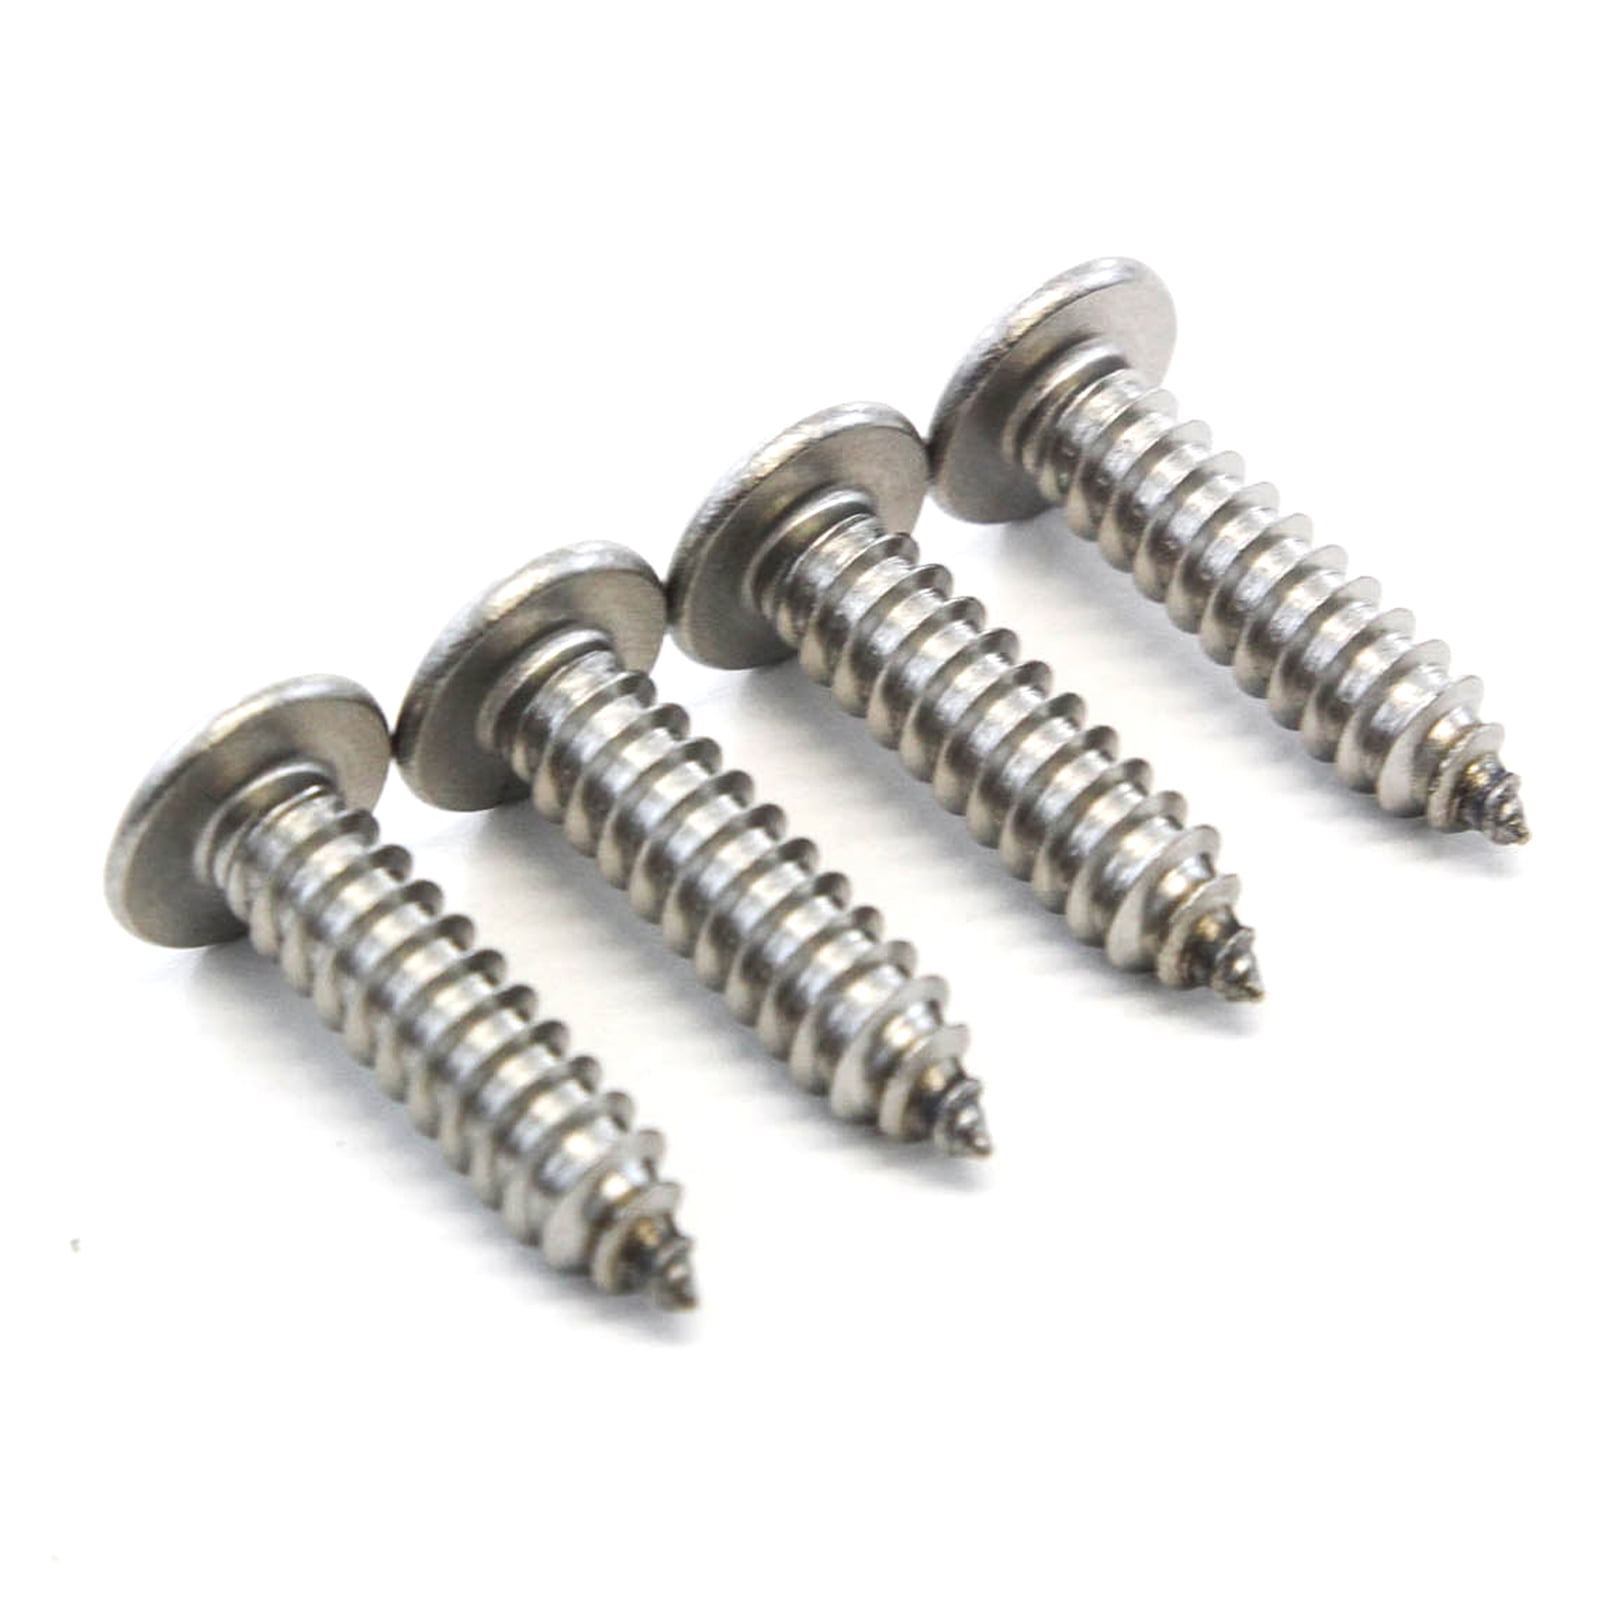 Set of 8 Stainless Steel License Plate Frame Screws for Fastening License Plates Frames and Covers Stainless Steel Eight 8 Rustproof Stainless License Plate Screws 